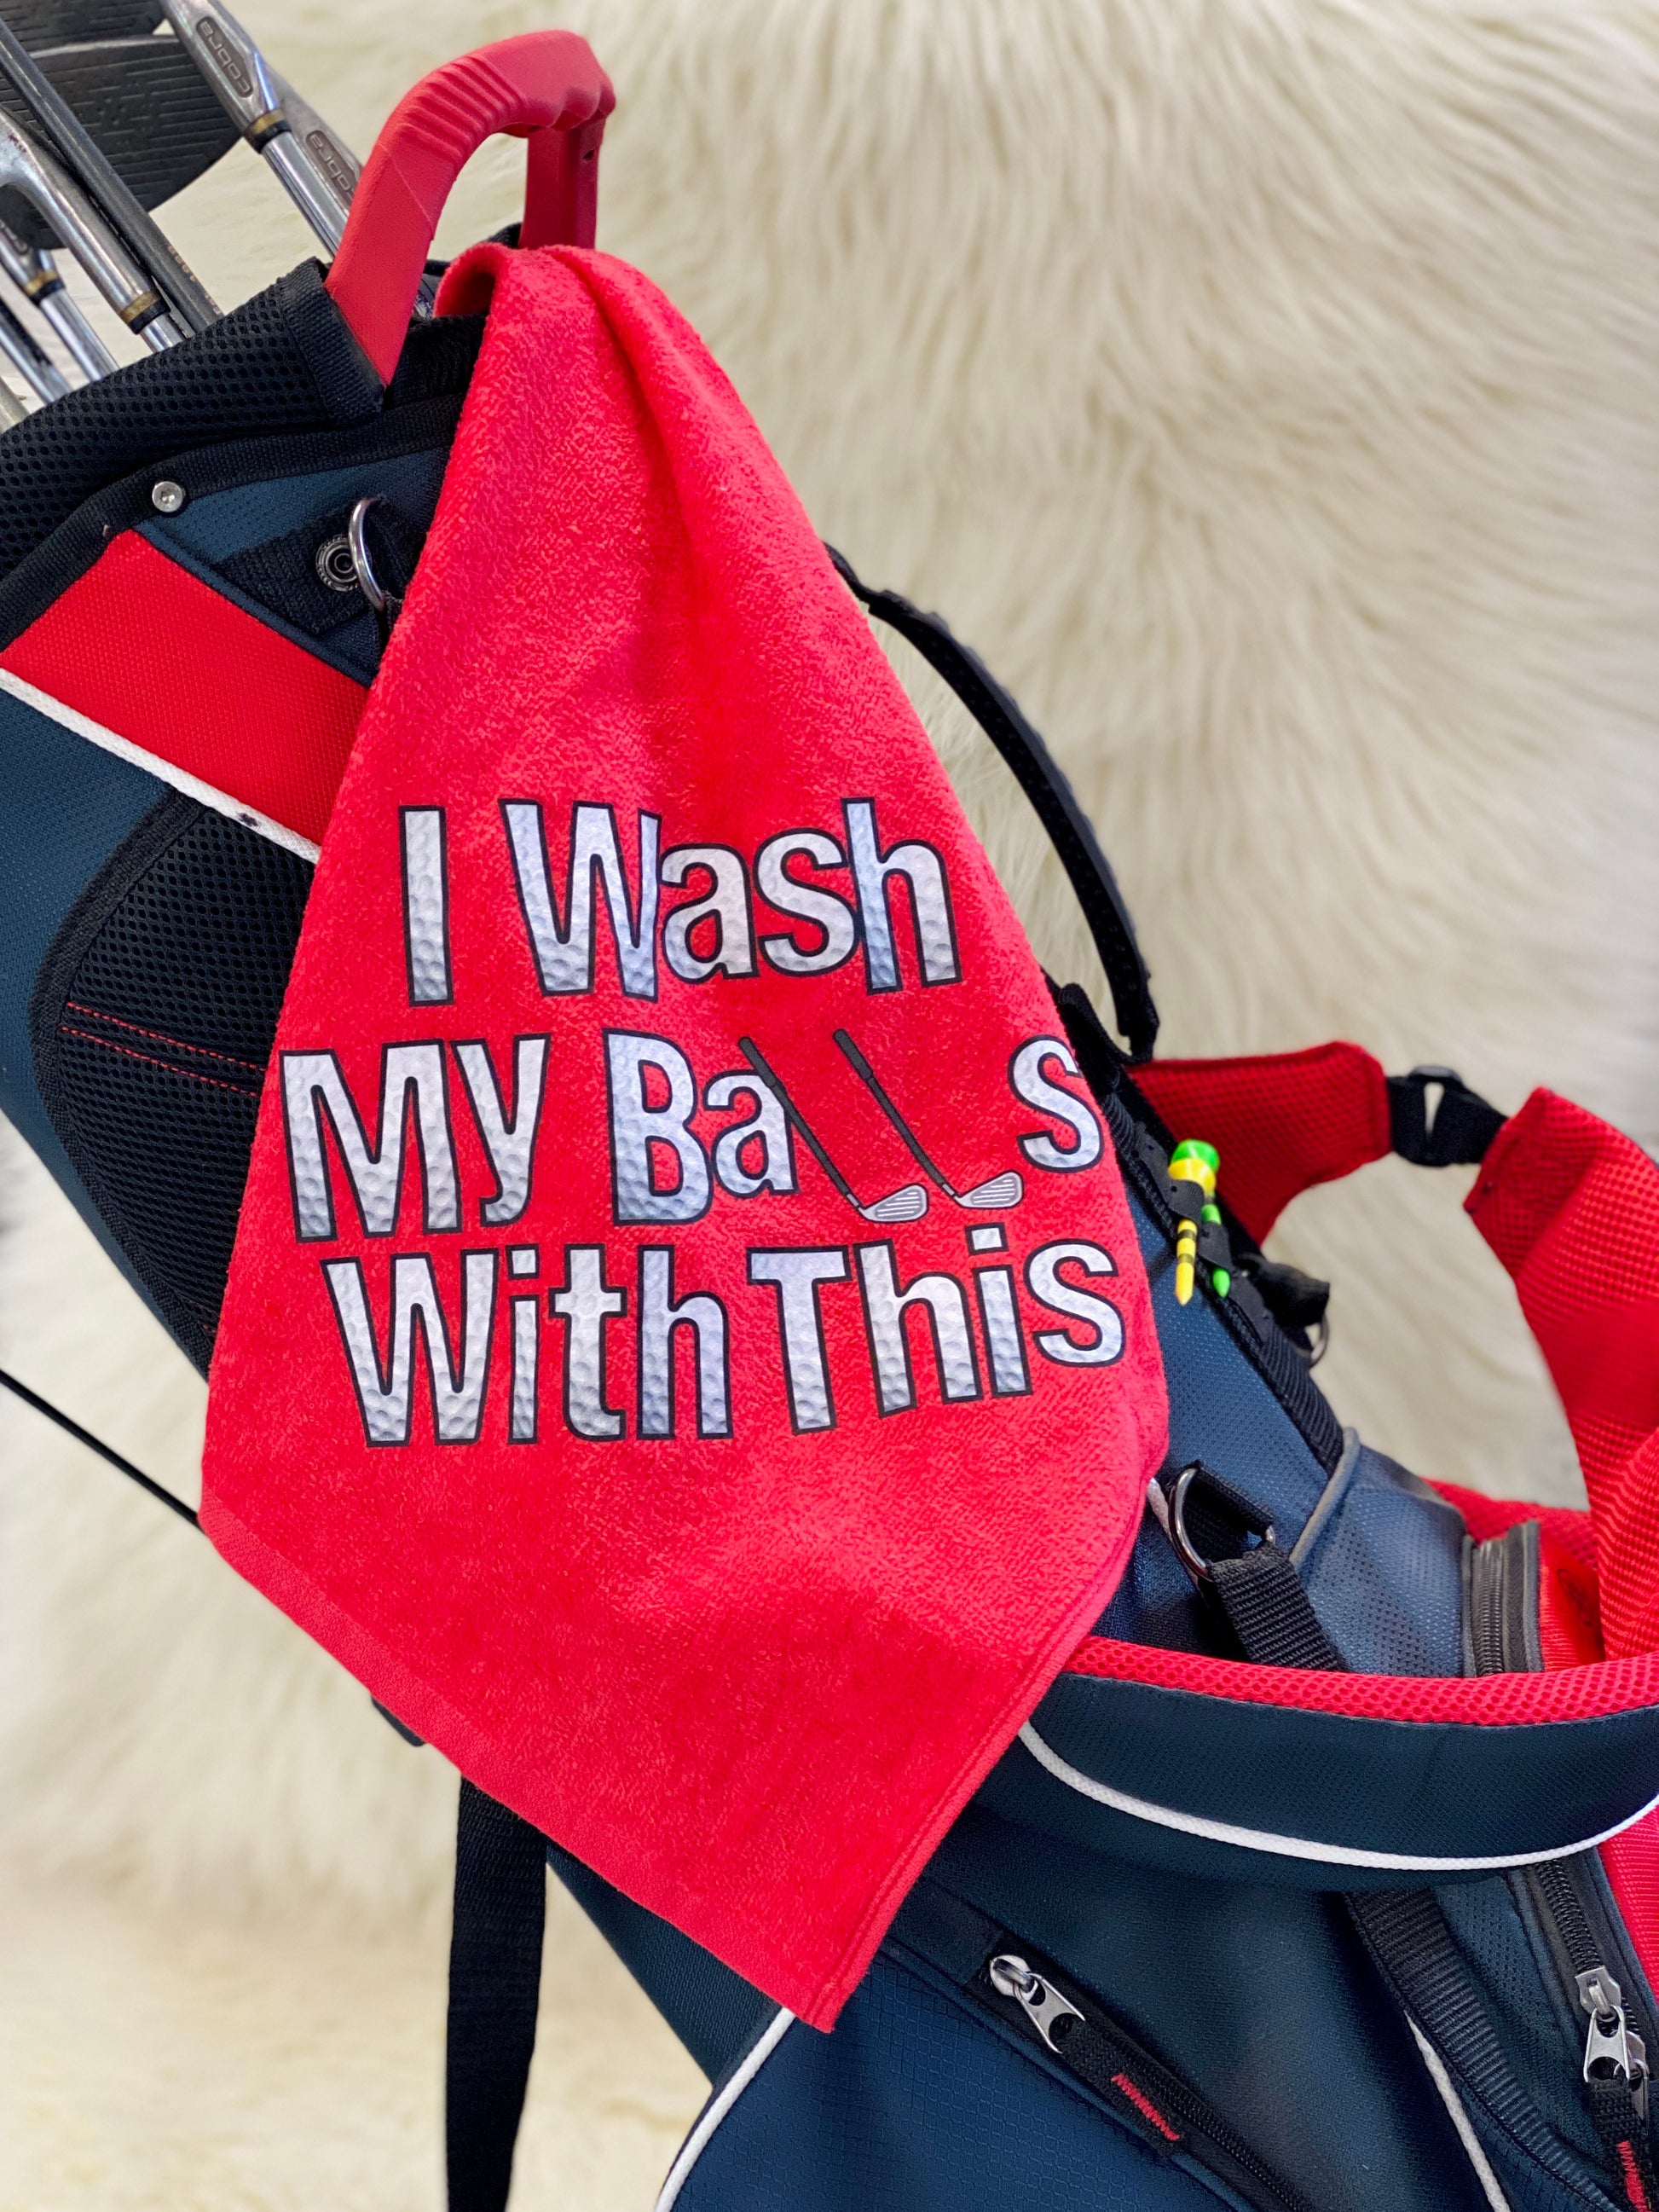 I Wash My Balls With This Golf Towel Introducing the ultimate golf accessory for the man who takes his game seriously - the "I Wash My Balls With This Golf Towel"! This high-quality golf towel is made of 100% cotton, ensuring maximum absorbency and durability on the course.